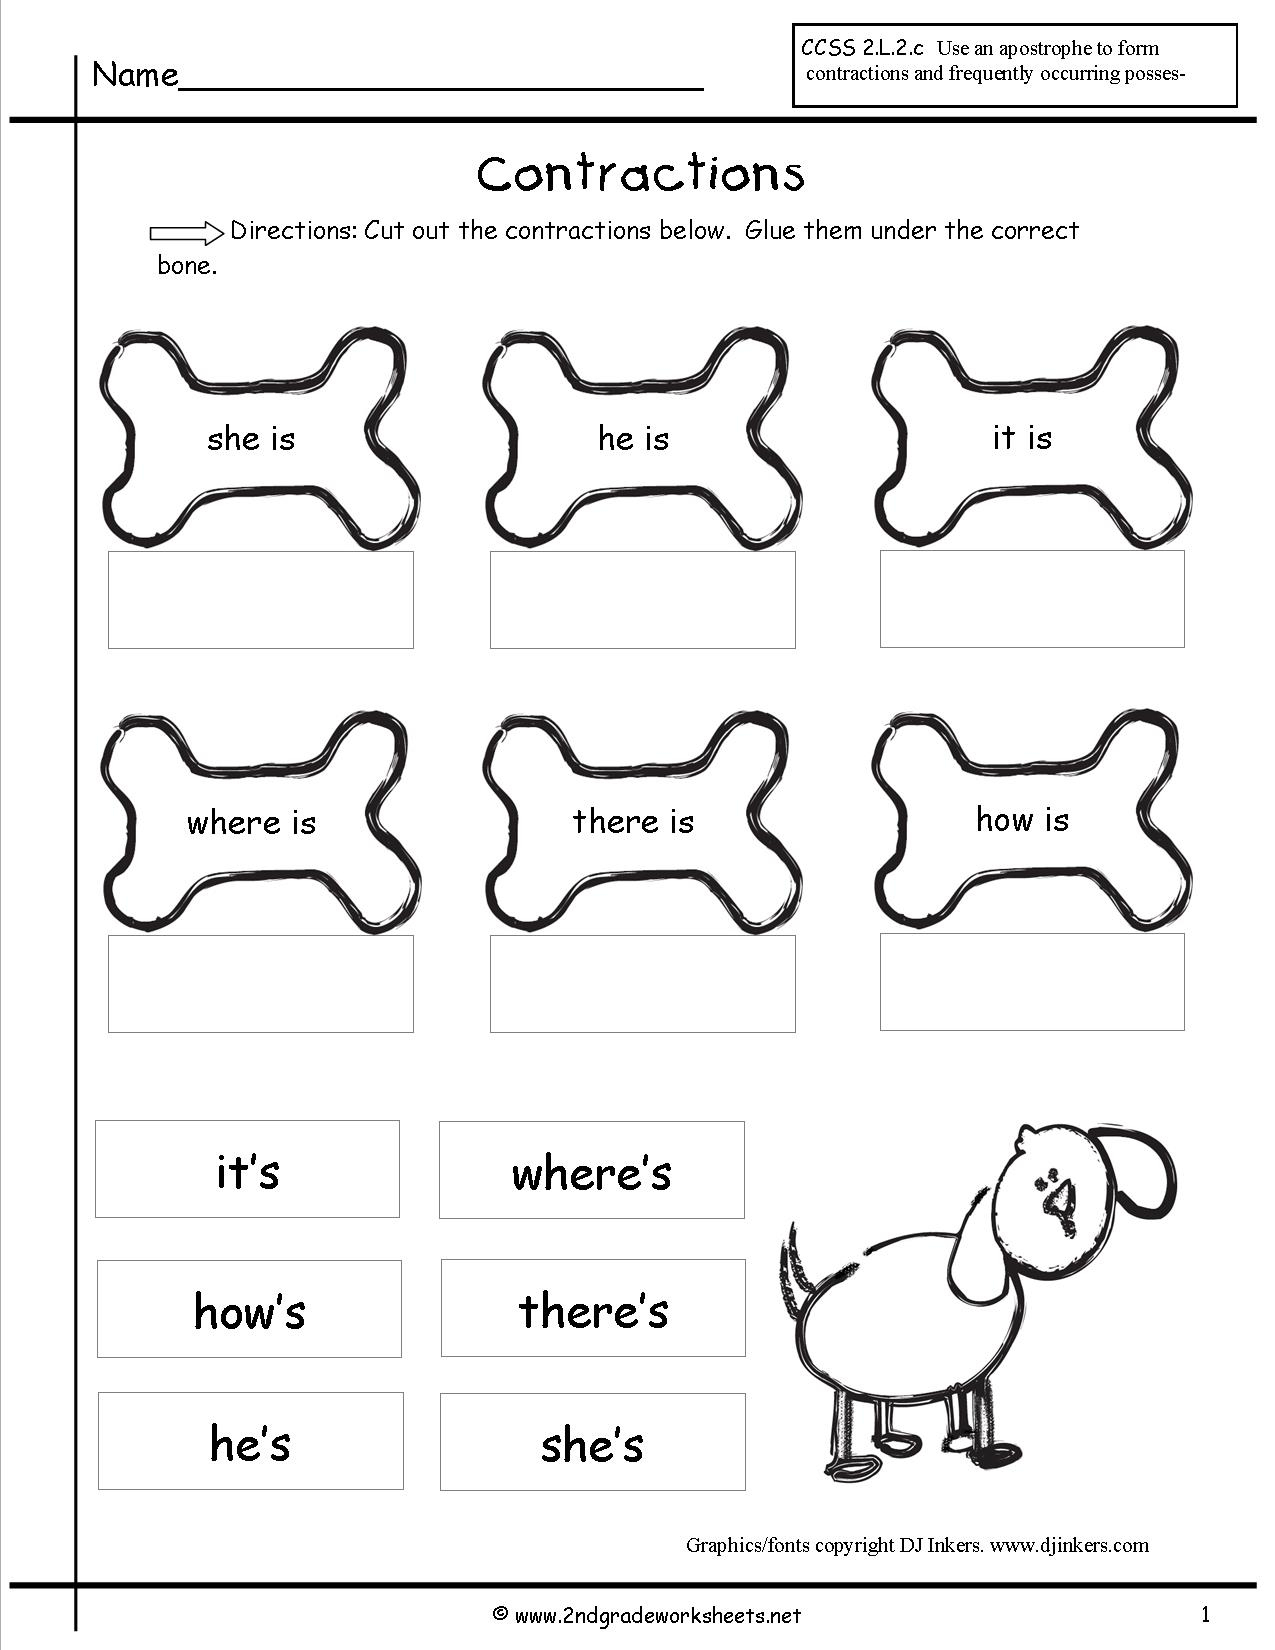 Free Contractions Worksheets And Printouts - Free Printable Language Arts Worksheets For 1St Grade